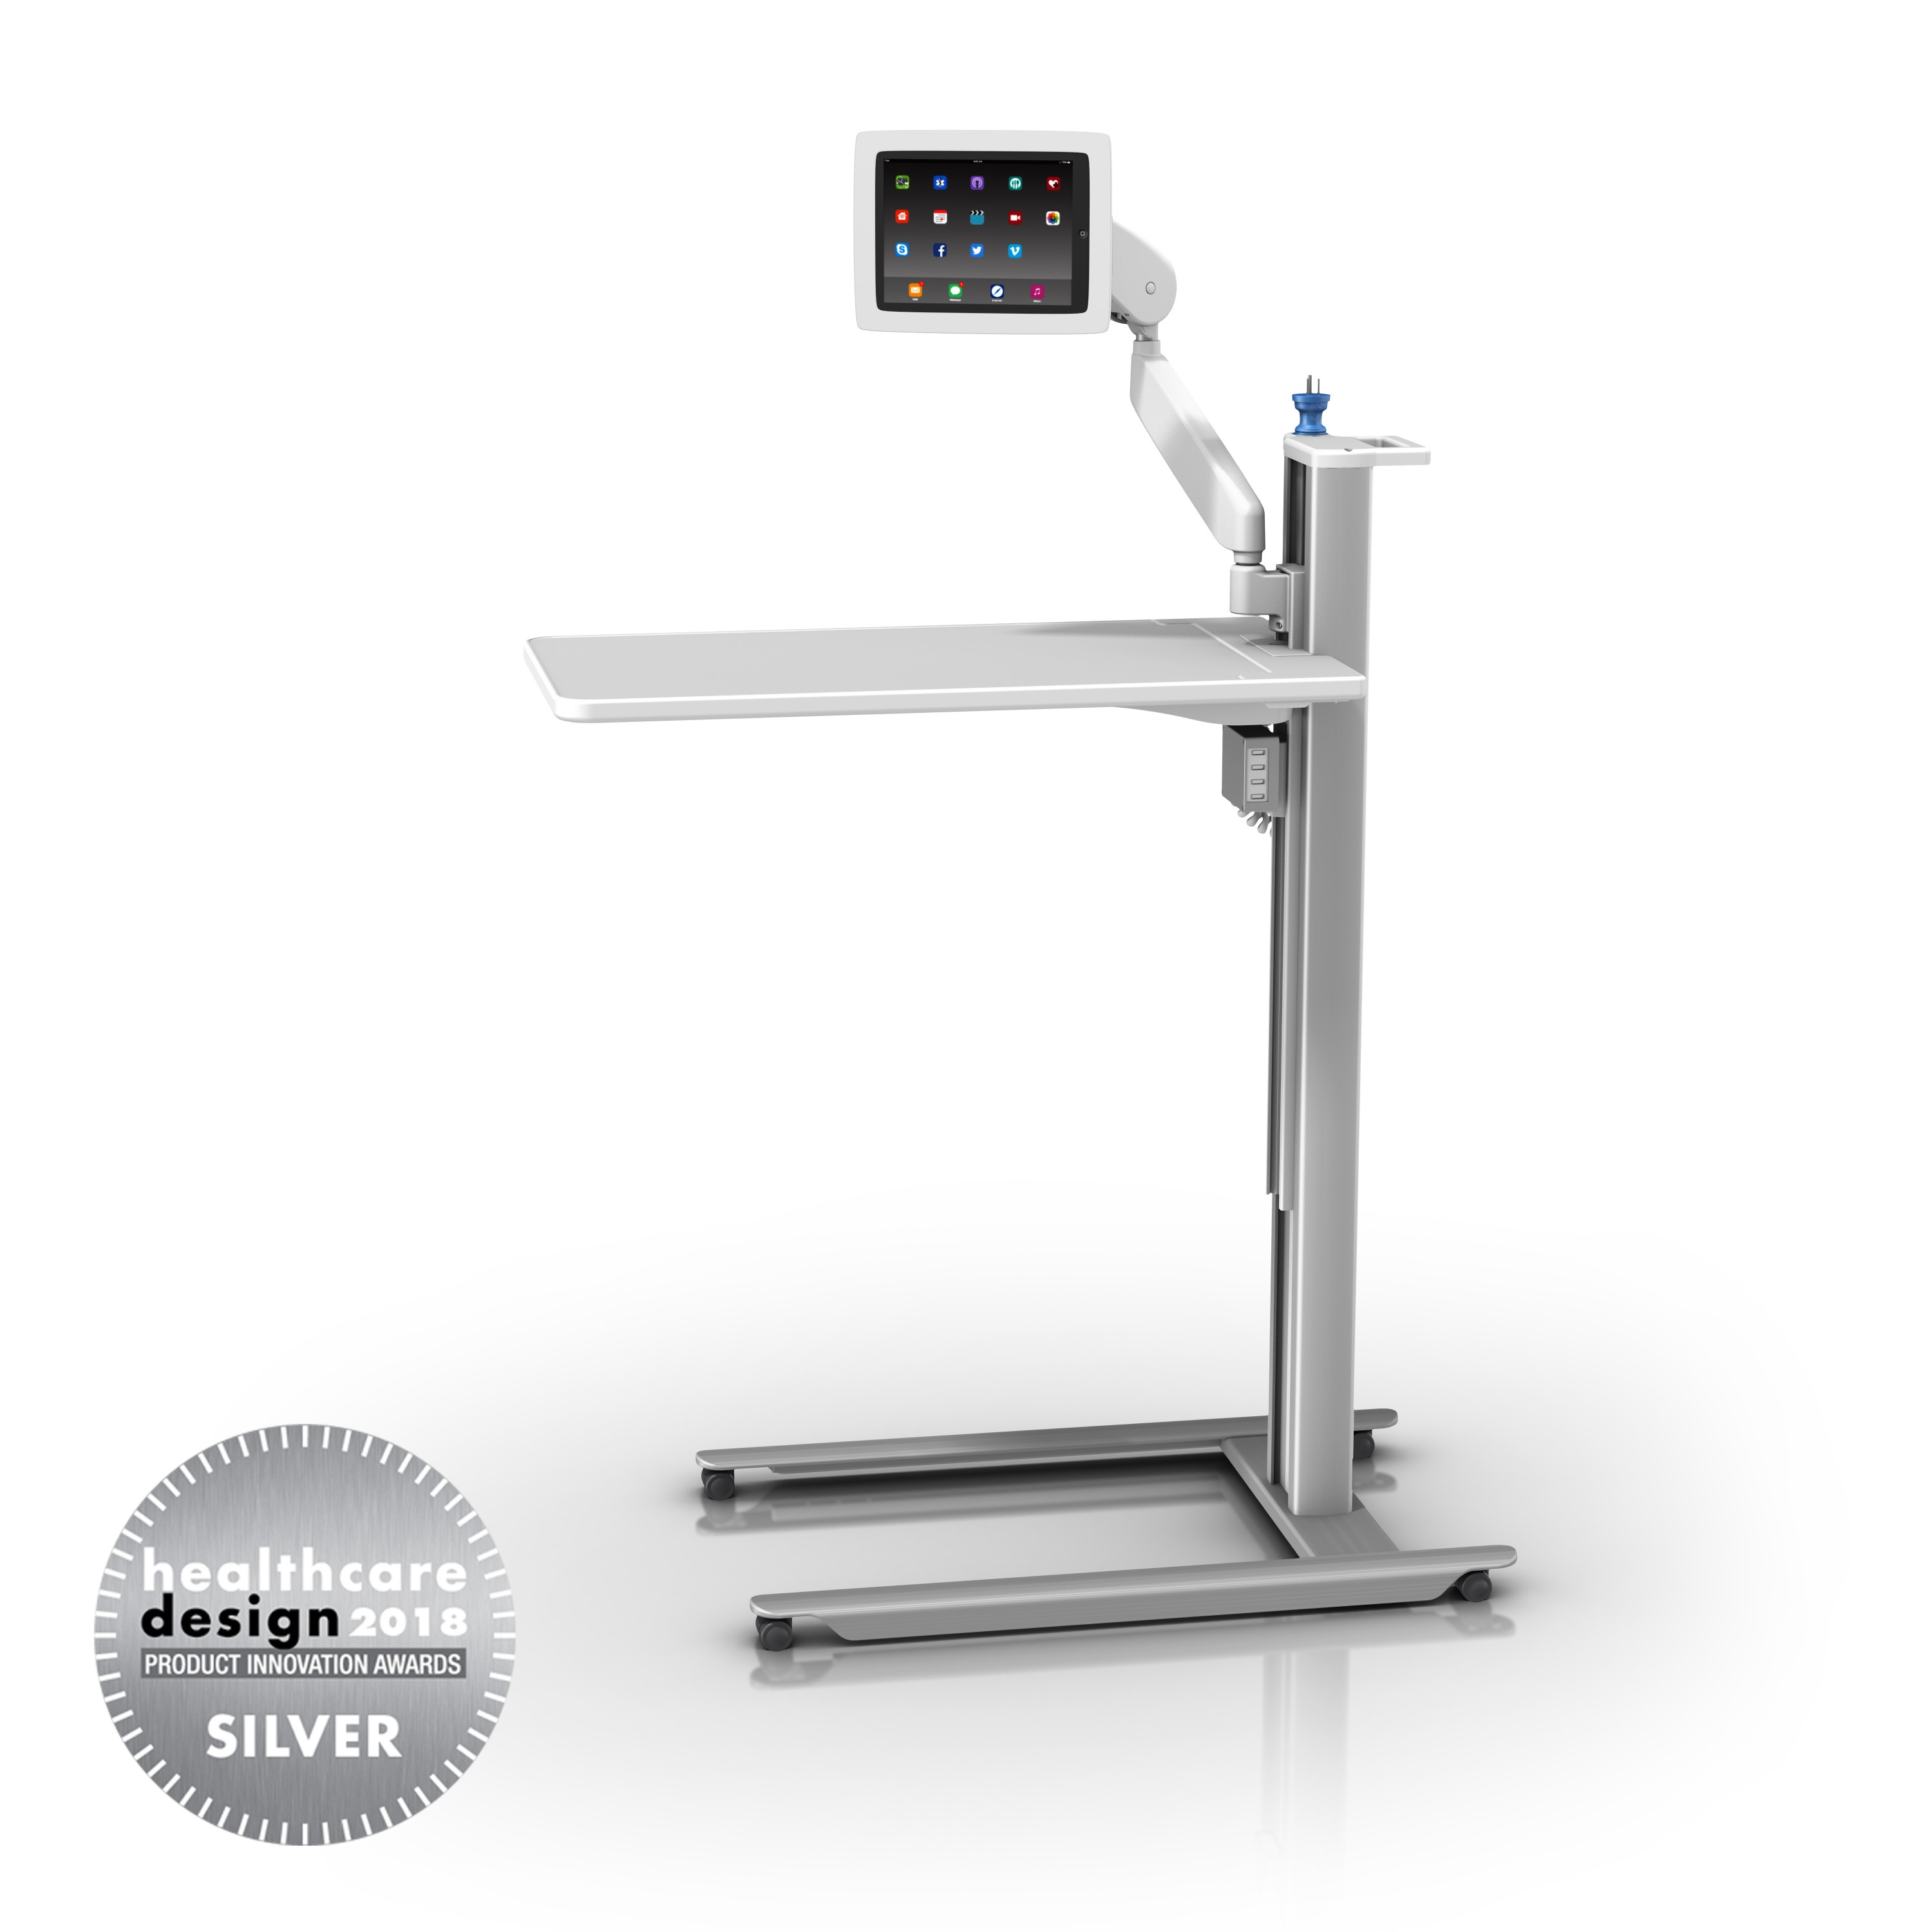 Product Innovation: The Award-Winning GCX Patient Engagement Table’s Origin